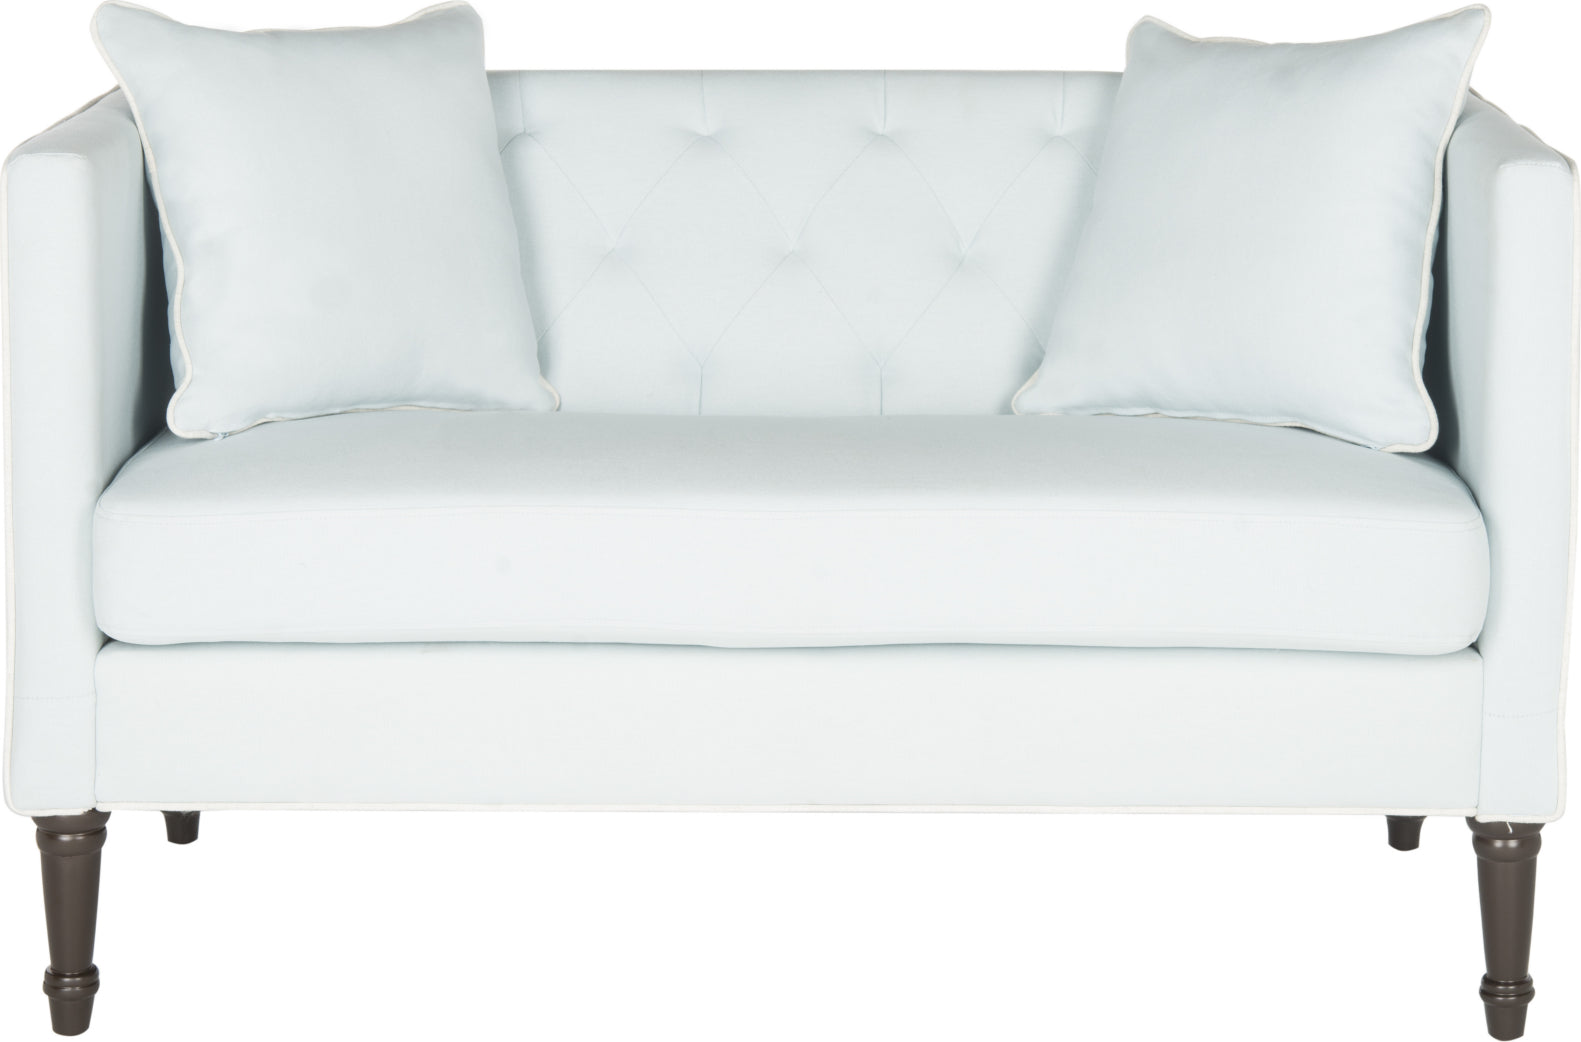 Safavieh Sarah Tufted Settee With Pillows Powder Blue and White Espresso Furniture main image